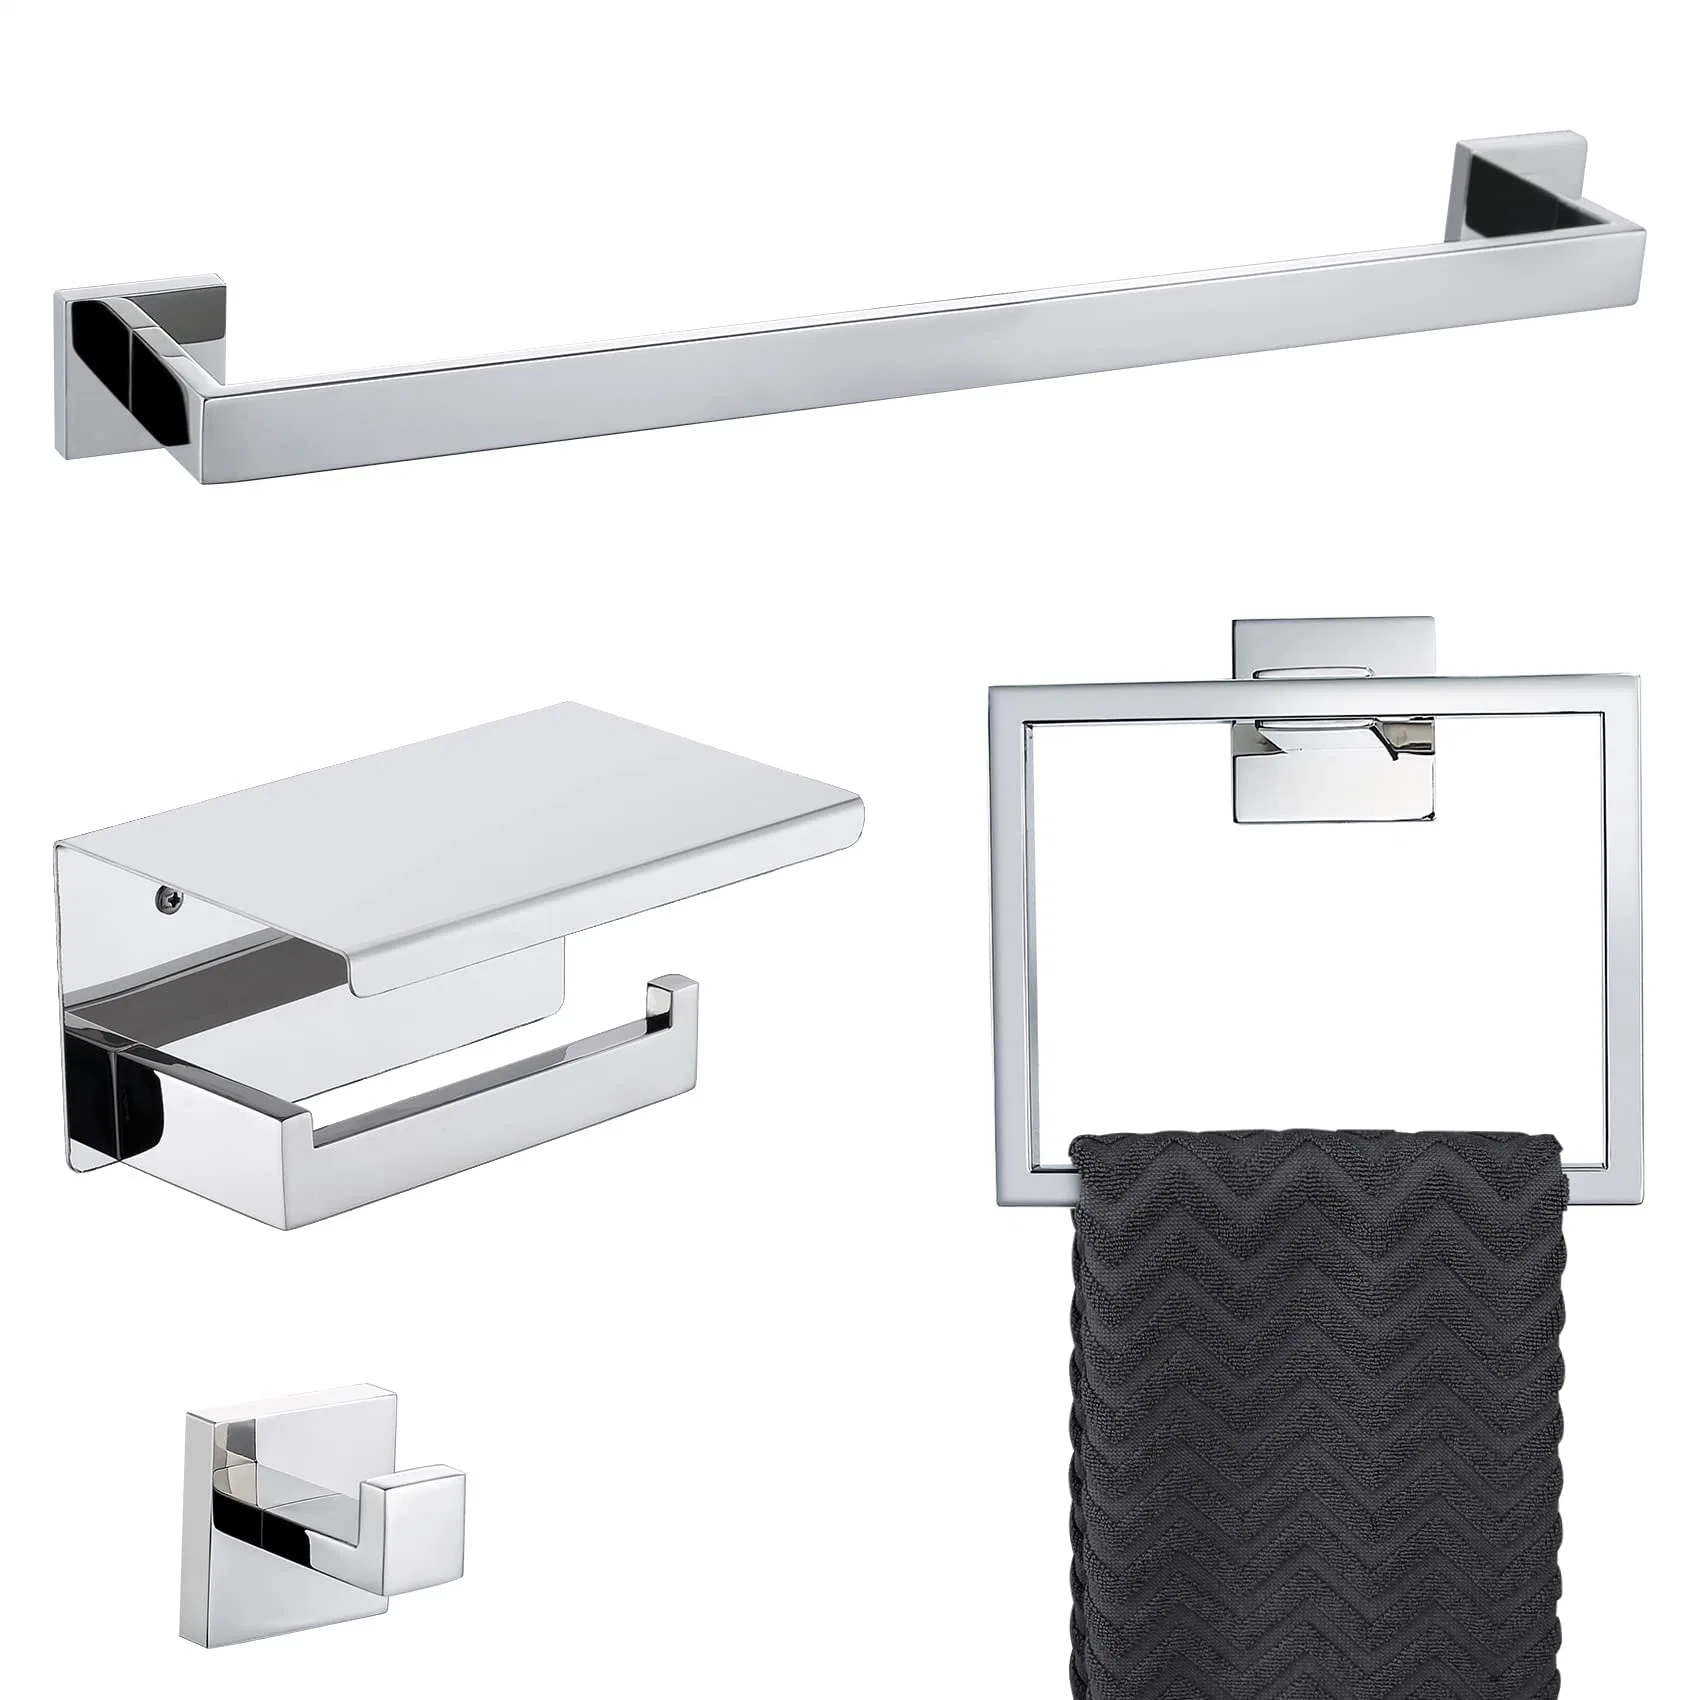 Hotel Modern Wall Mounted Stainless Steel Bathroom Accessories Hardware Sets